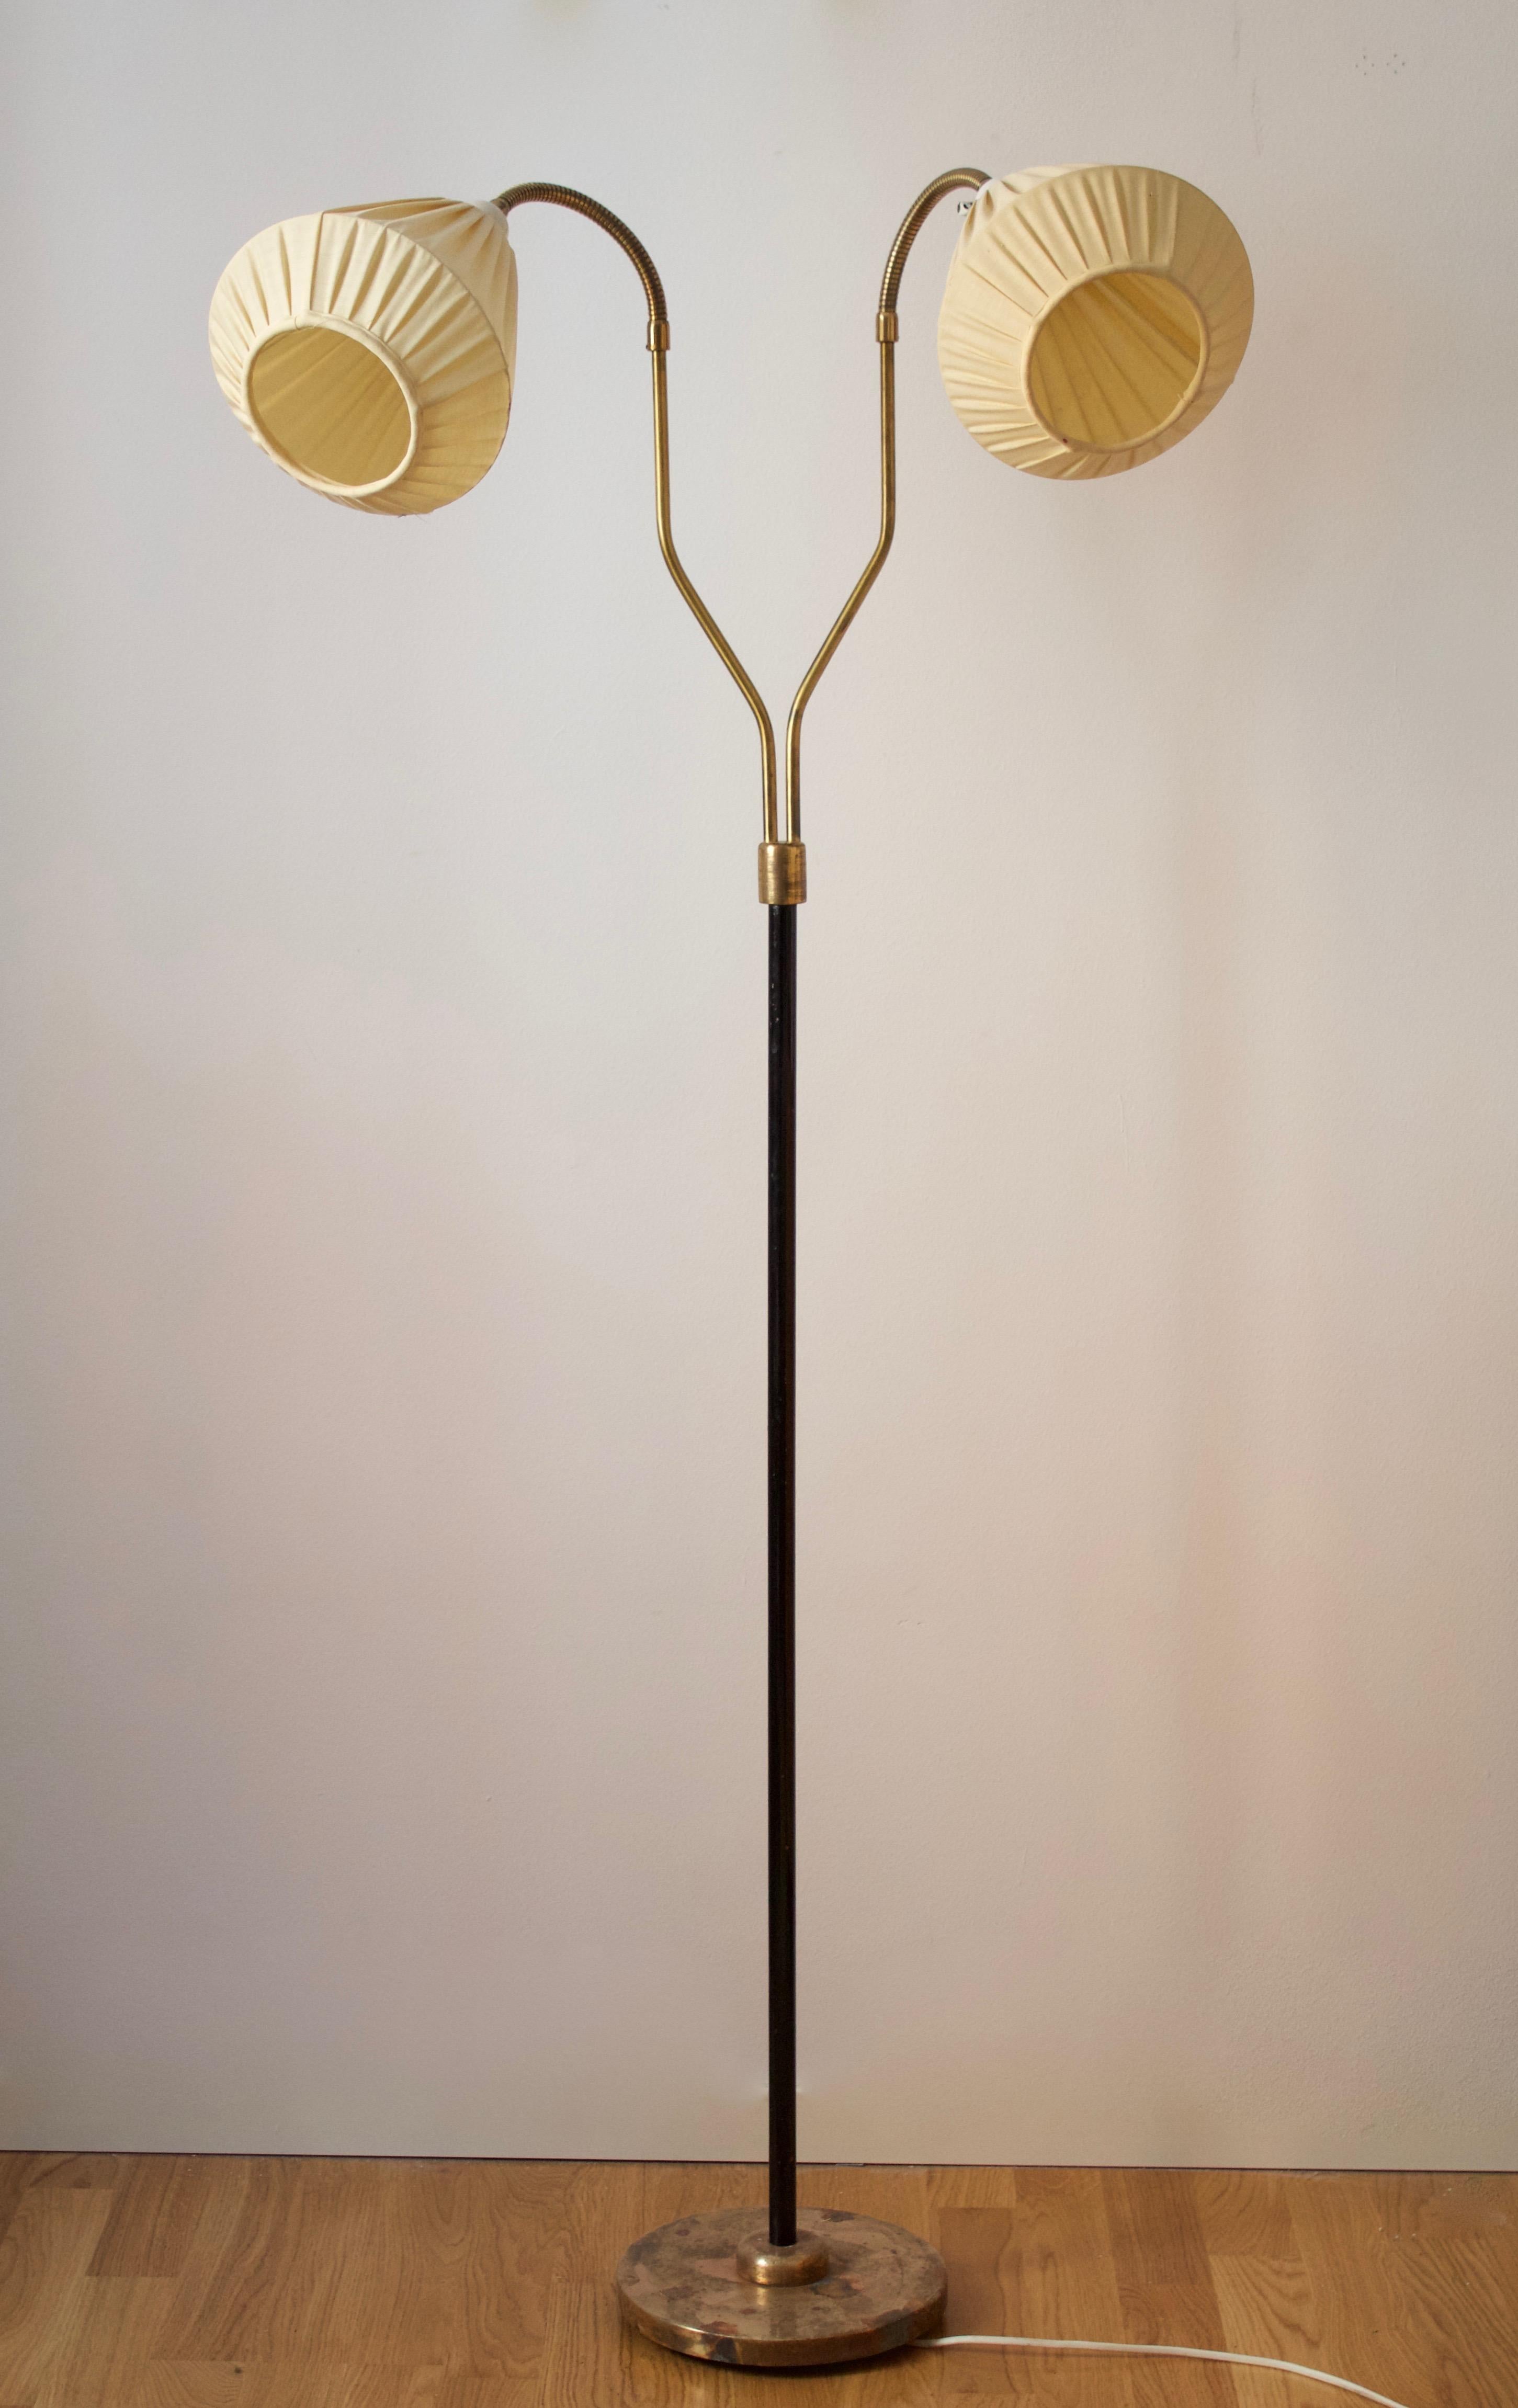 An adjustable two-armed floor lamp. In lacquered metal, brass, fabric. Vintage lampshades.